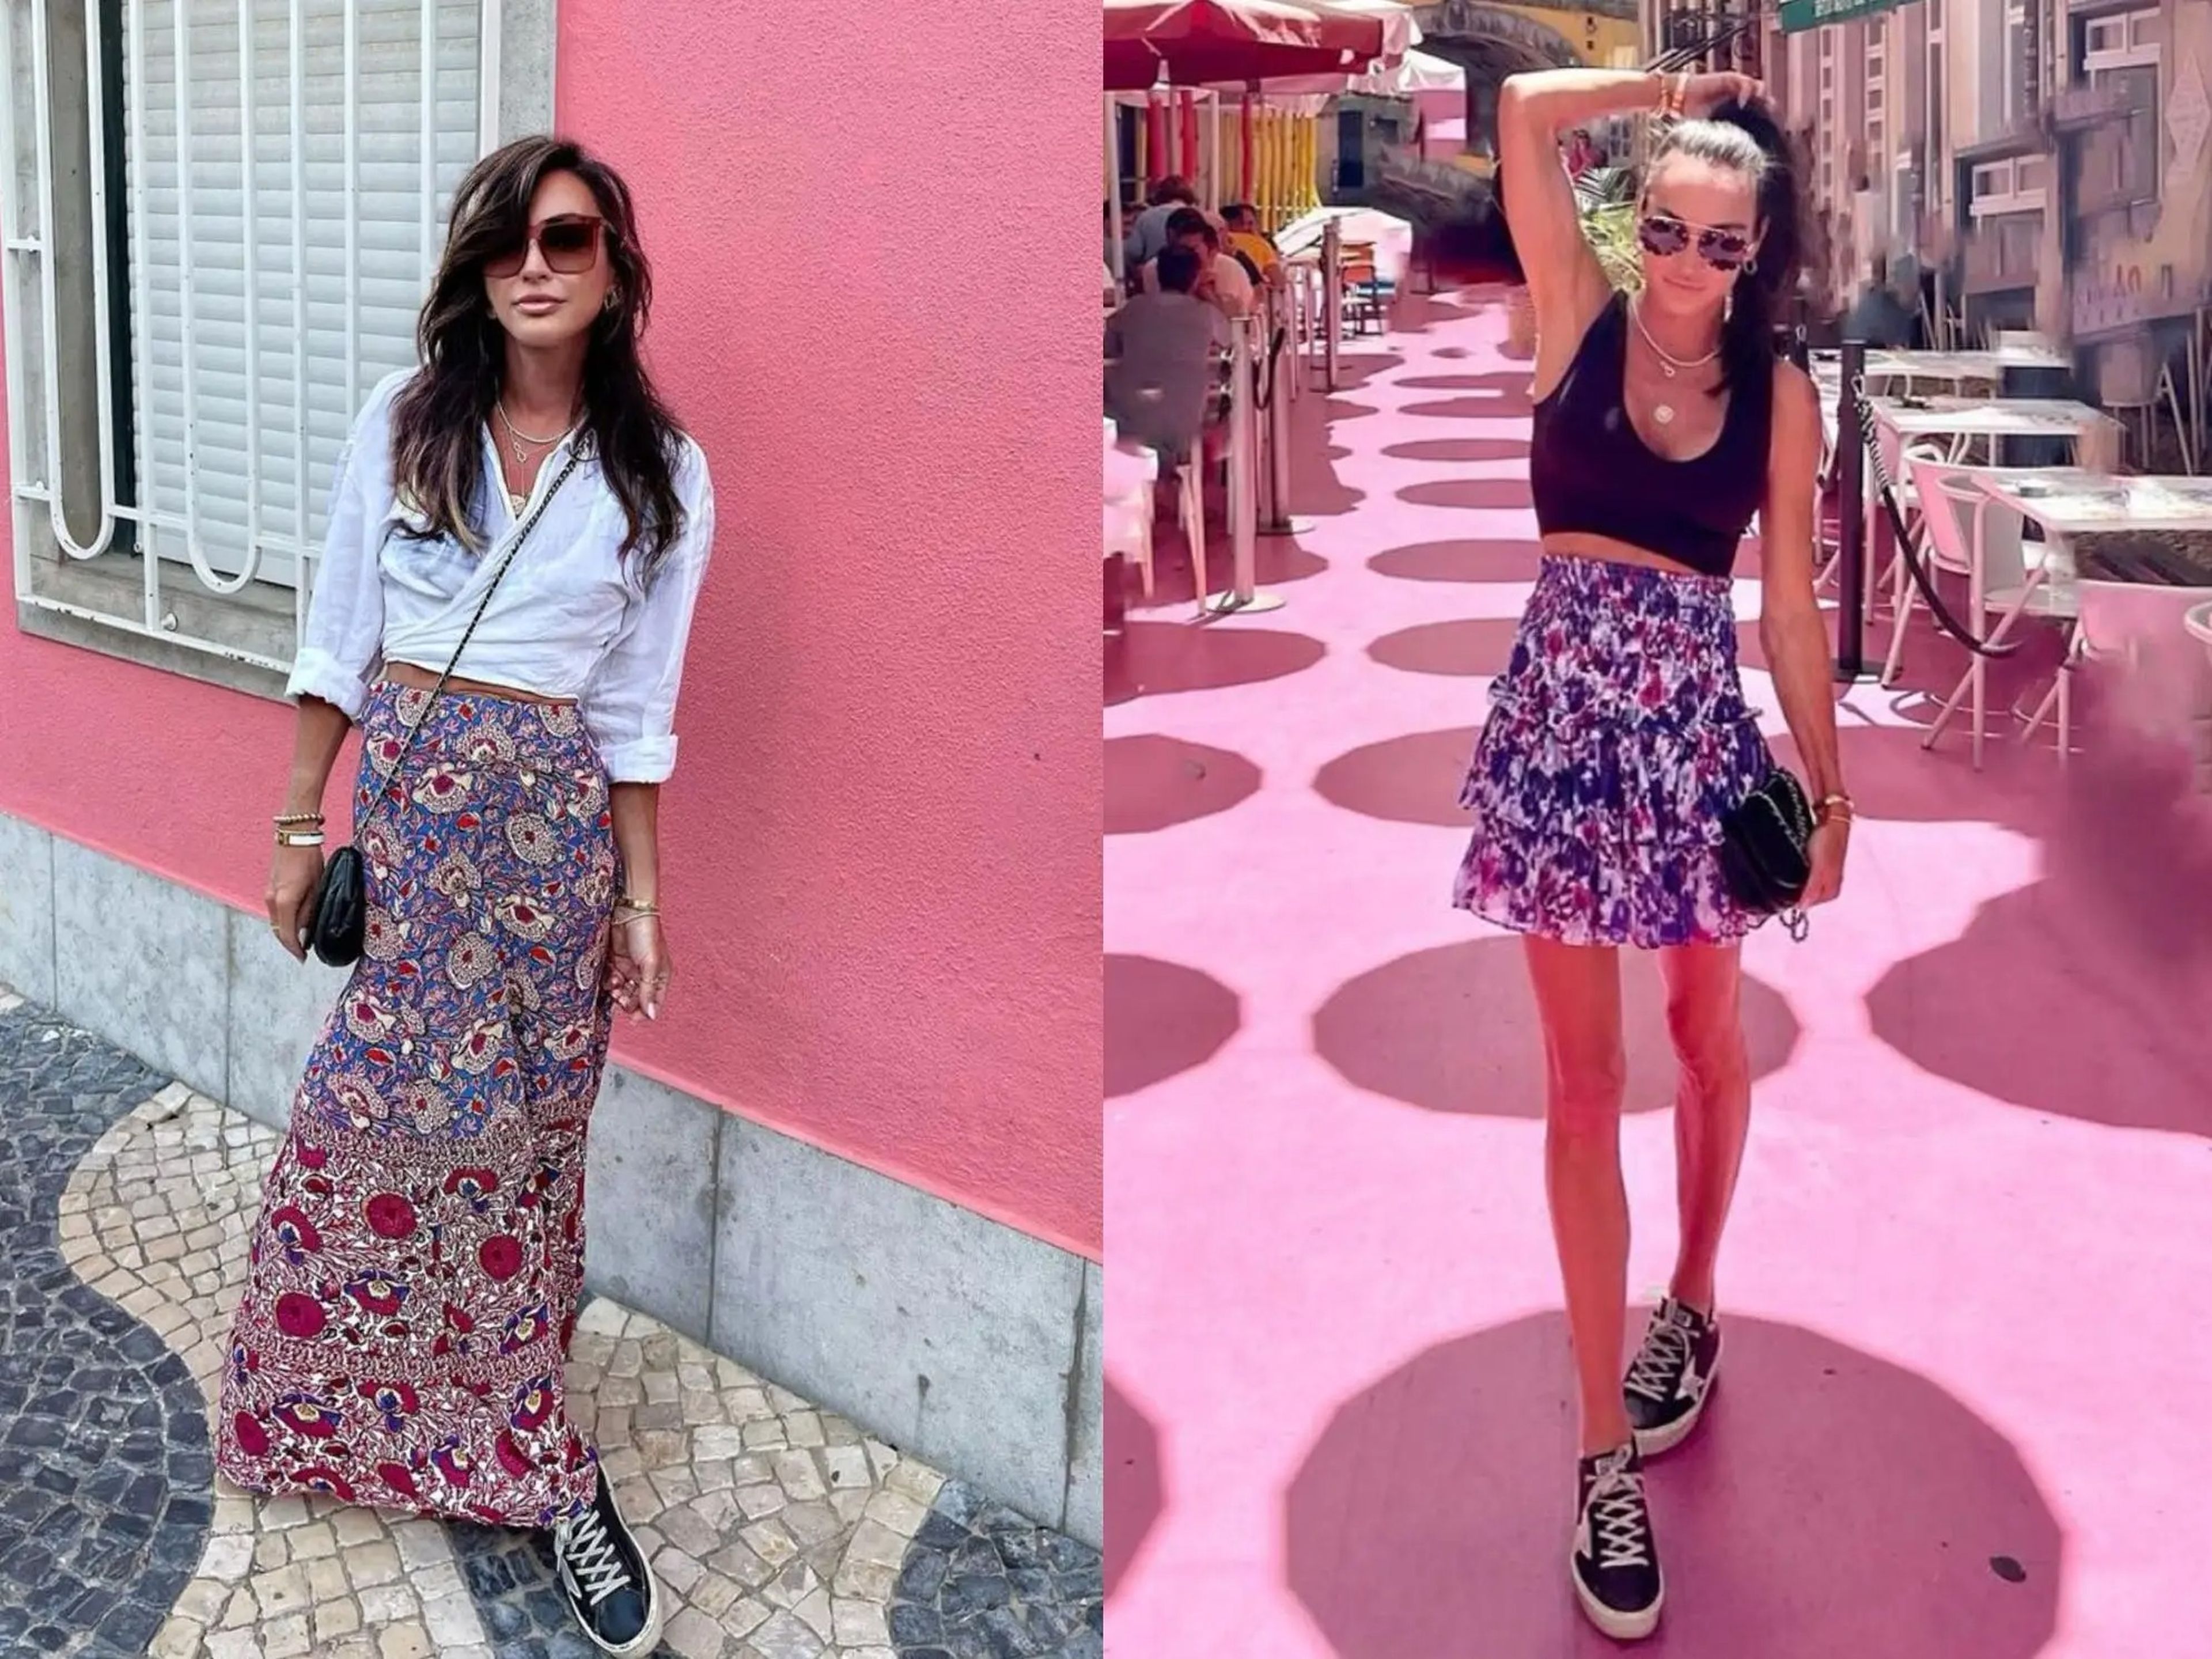 Right: The stylist wears a white shirt, a floral pink skirt, and black shoes outside in front of a pink wall. The stylist wears a short colorful skirt and a black top while standing outside on a pink street with colorful umbrellas hanging above.